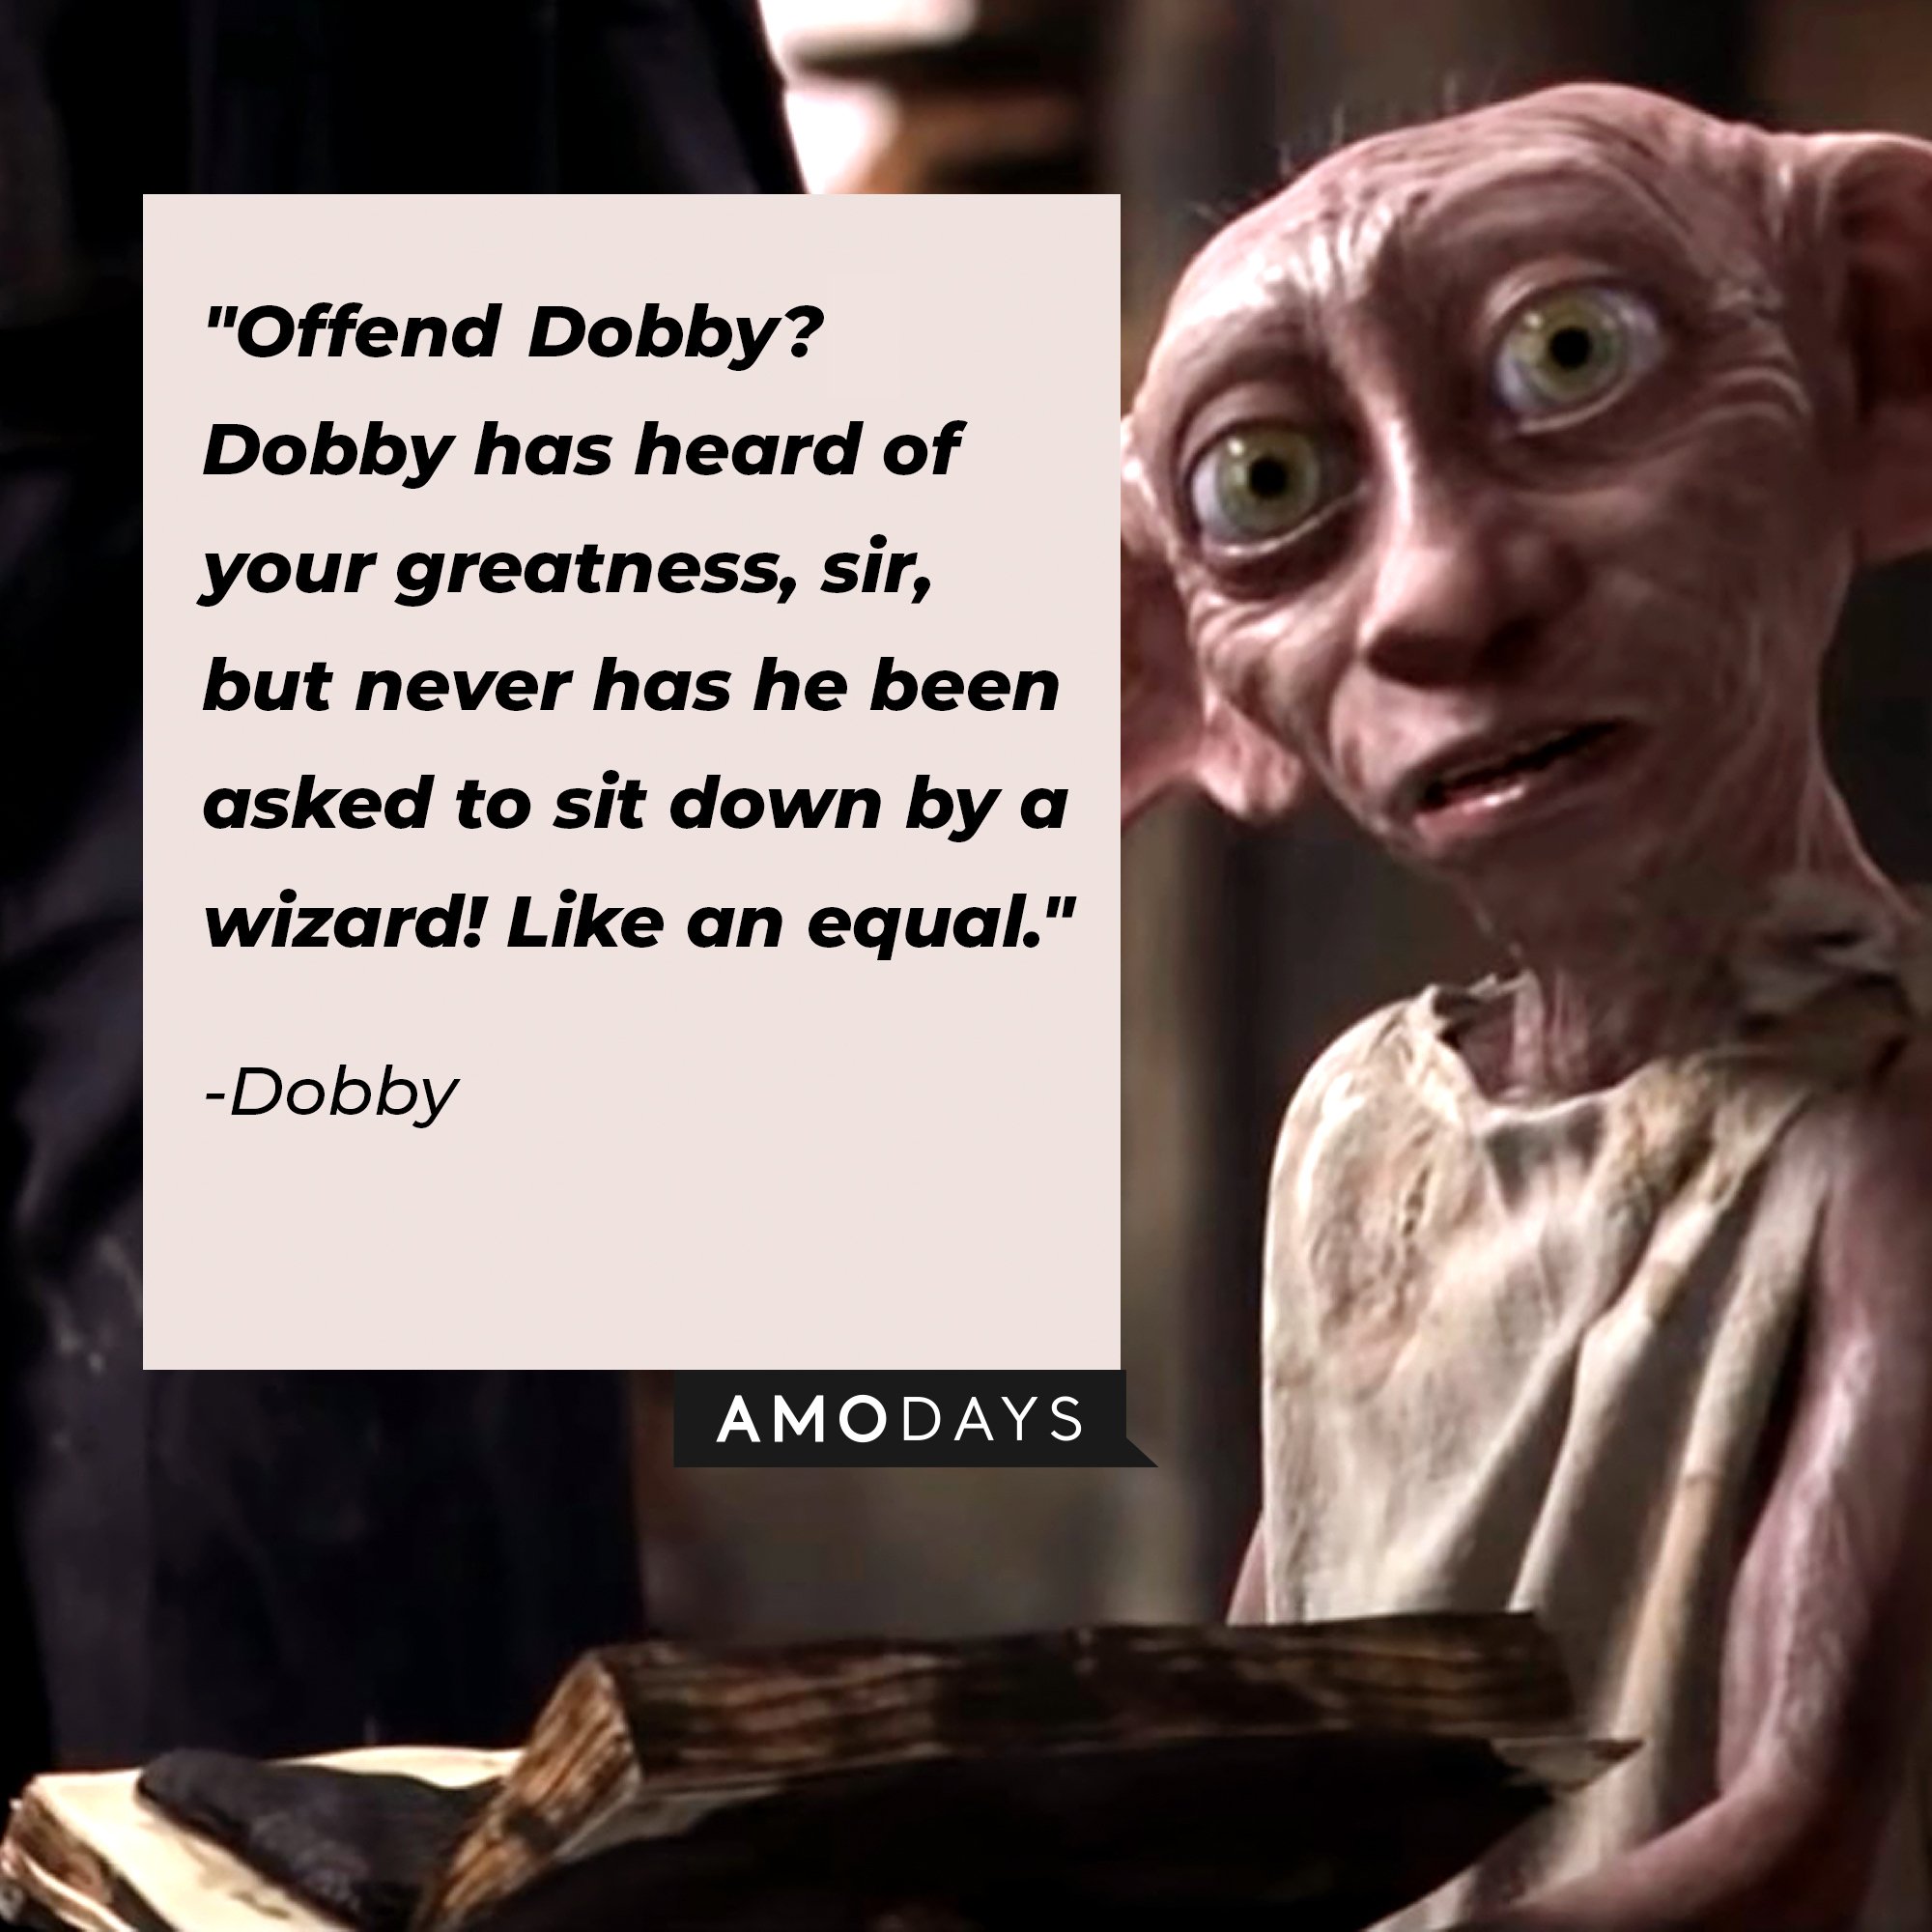 Dobby’s quote: "Offend Dobby? Dobby has heard of your greatness, sir, but never has he been asked to sit down by a wizard! Like an equal." | Image: AmoDays